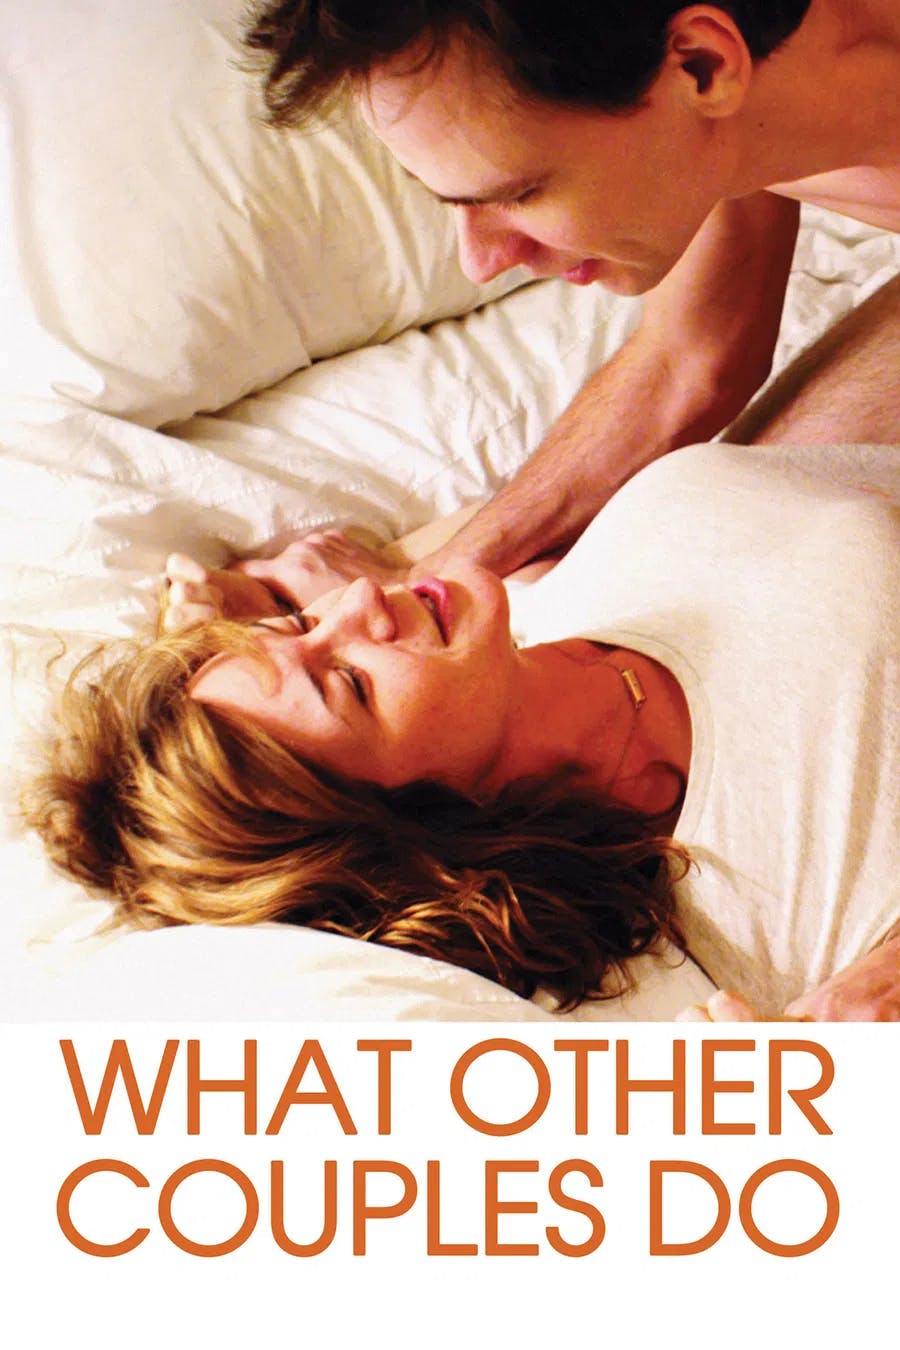 What Other Couples Do | poster VerticalHighlight